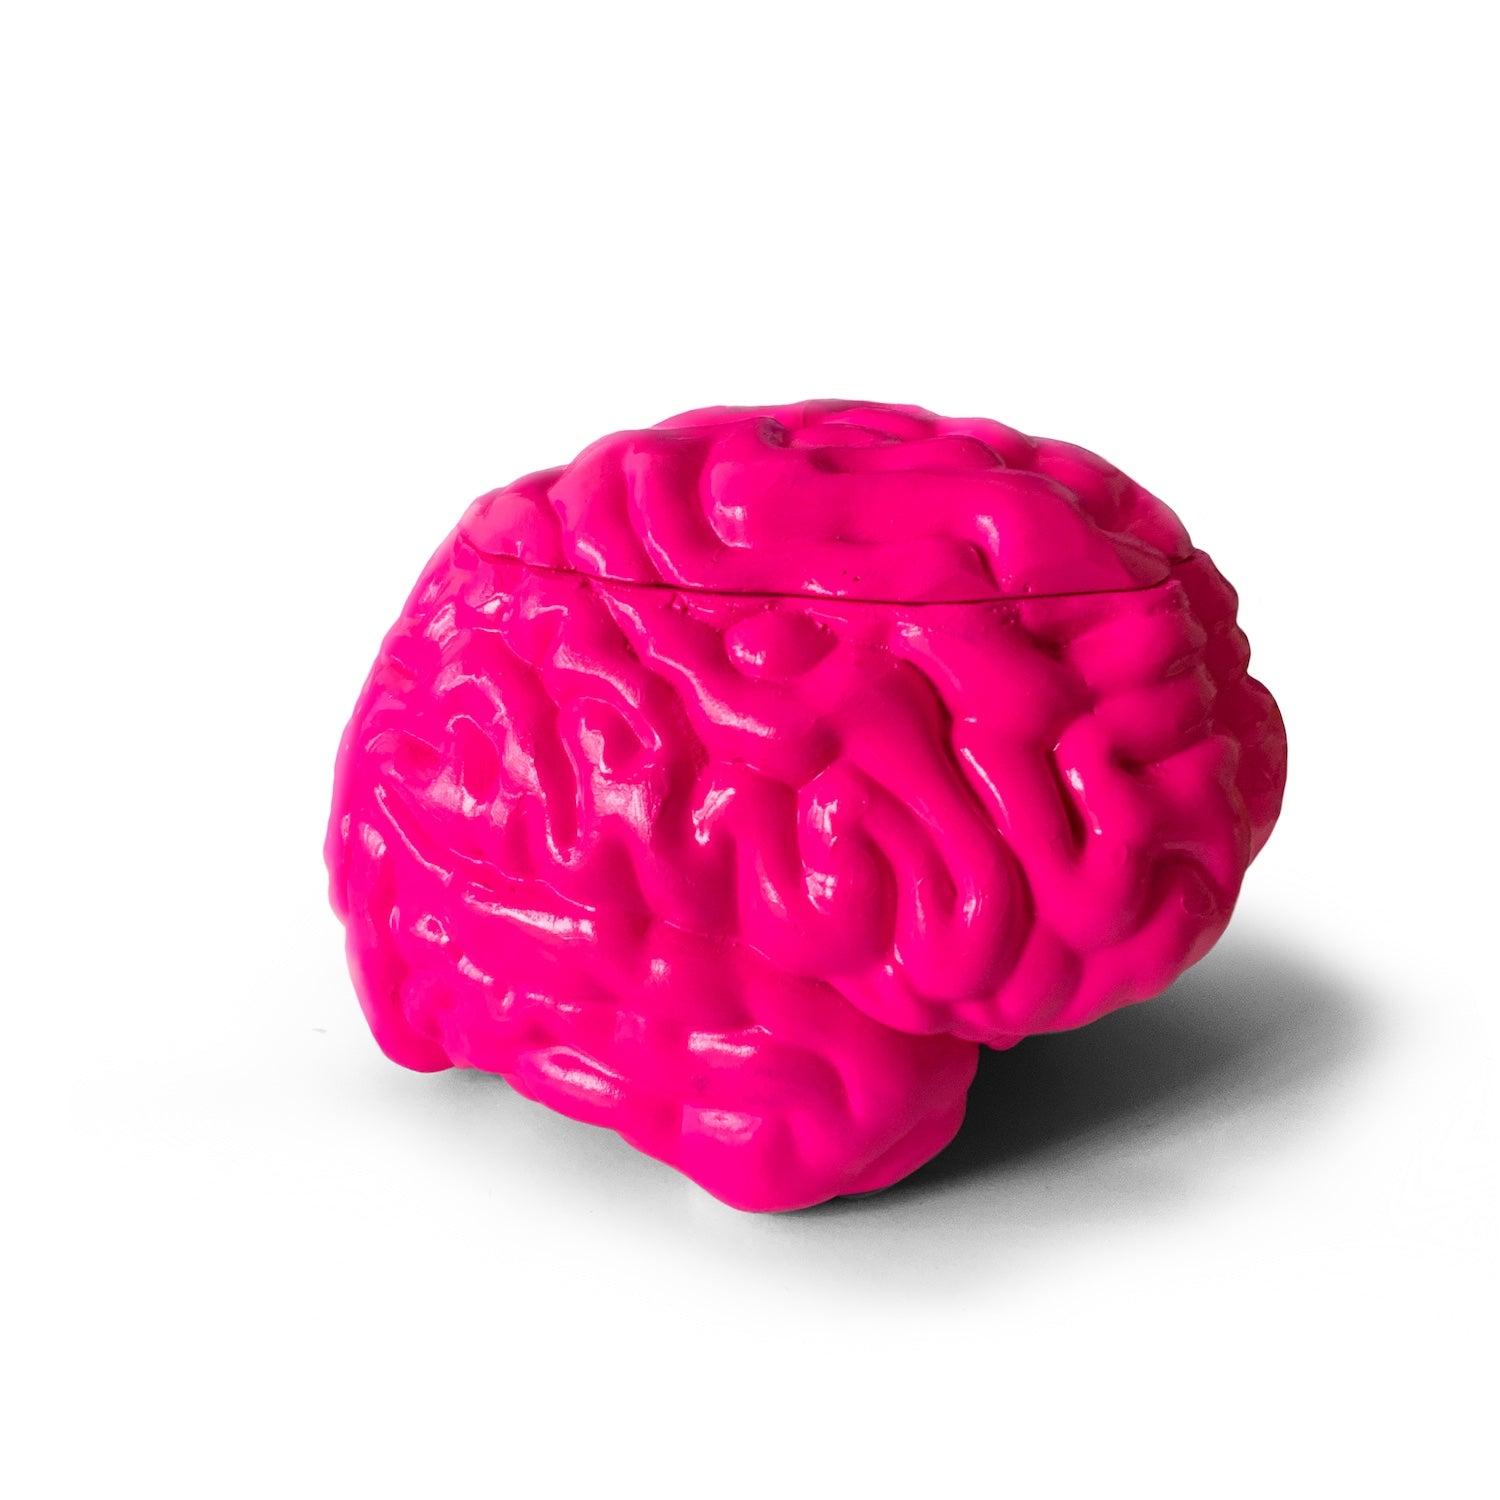 Scatter Brain (Pink) | Limited Edition Collectible by Sid G (toosid)